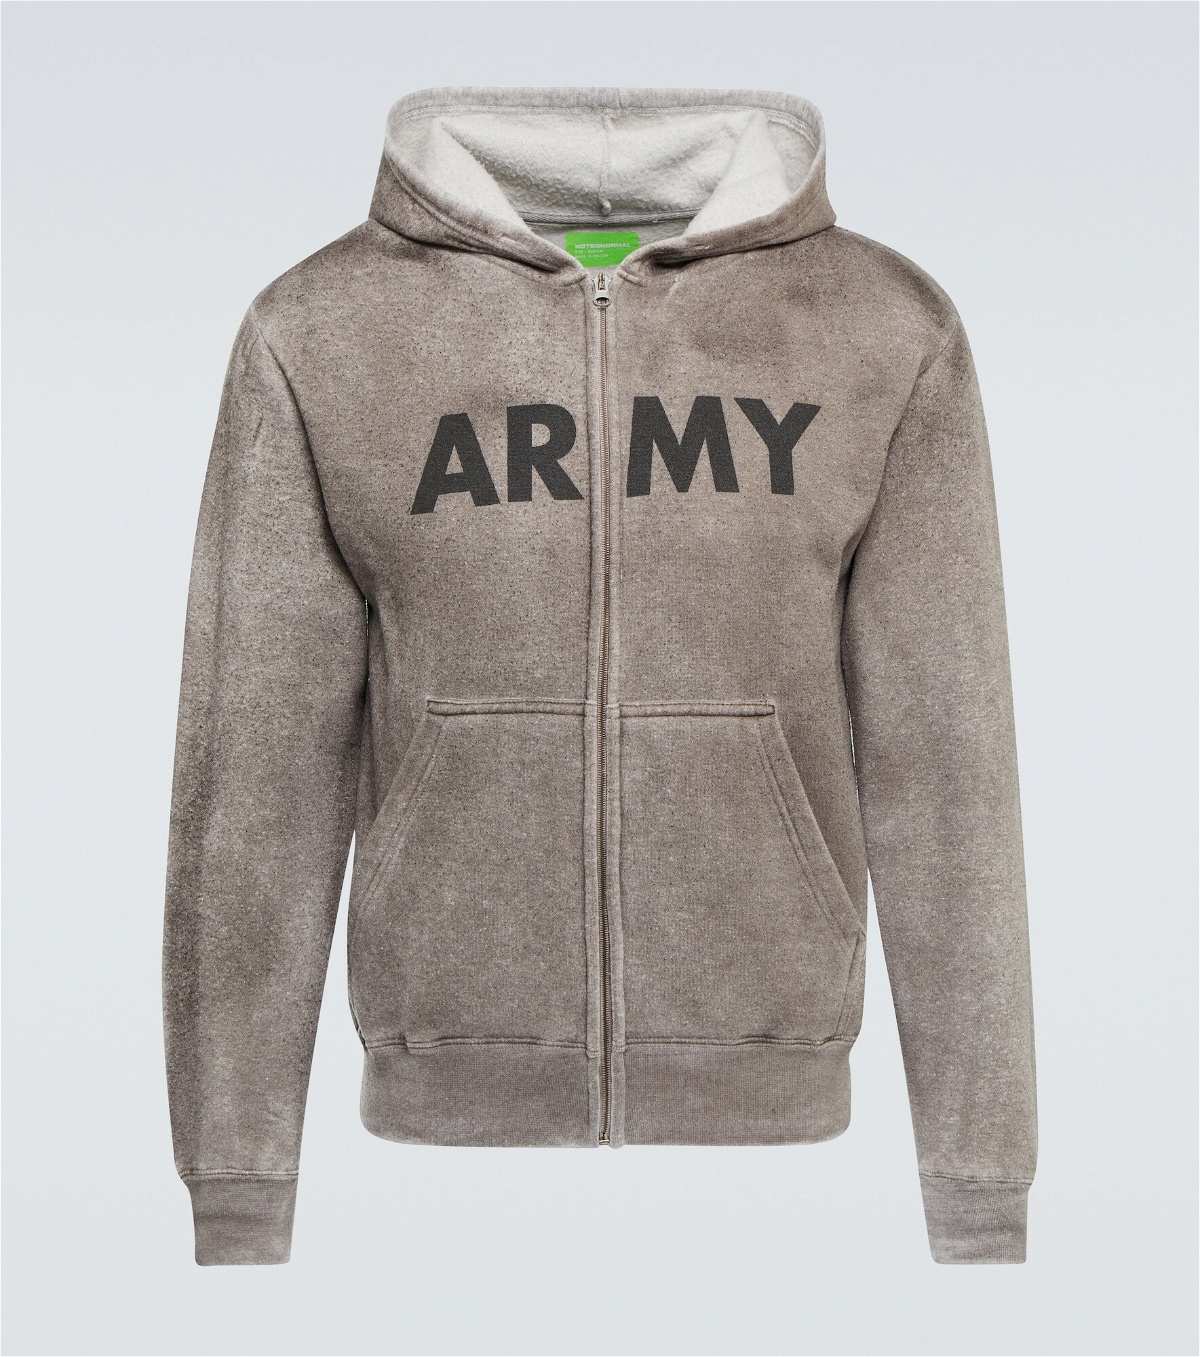 NotSoNormal - Army cotton jersey hoodie